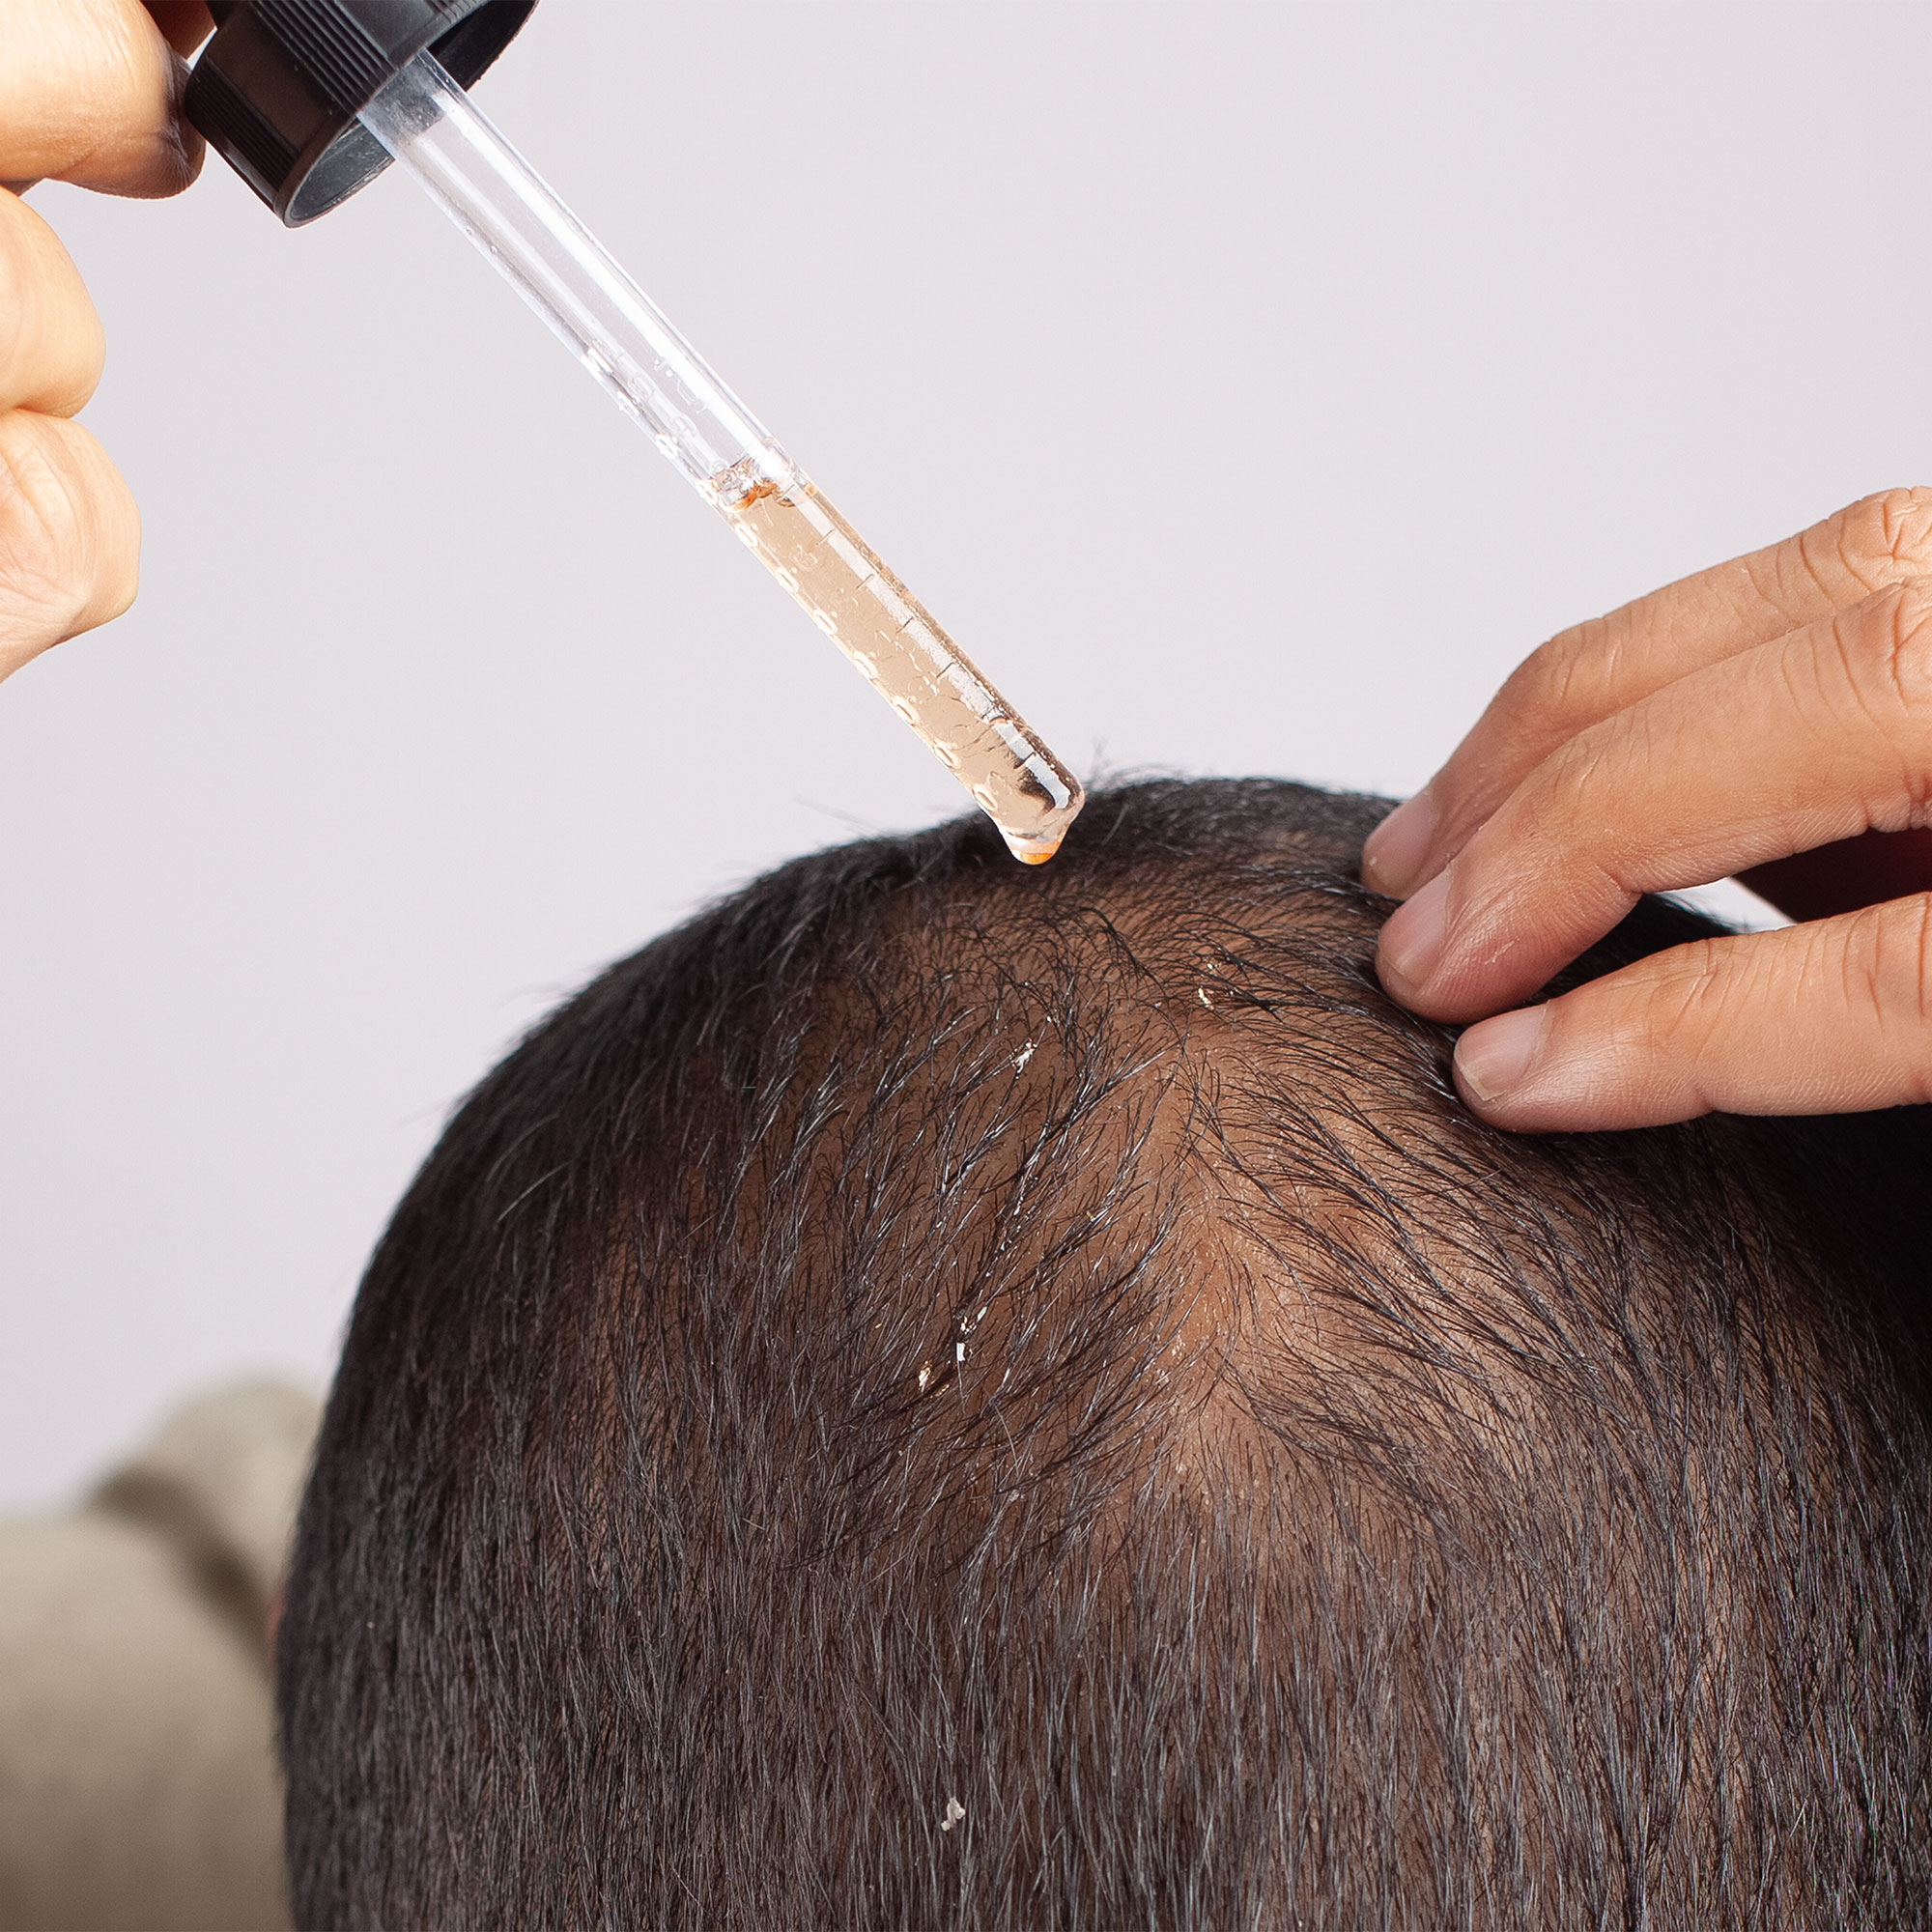 This Is How Alopecia Treatment Works